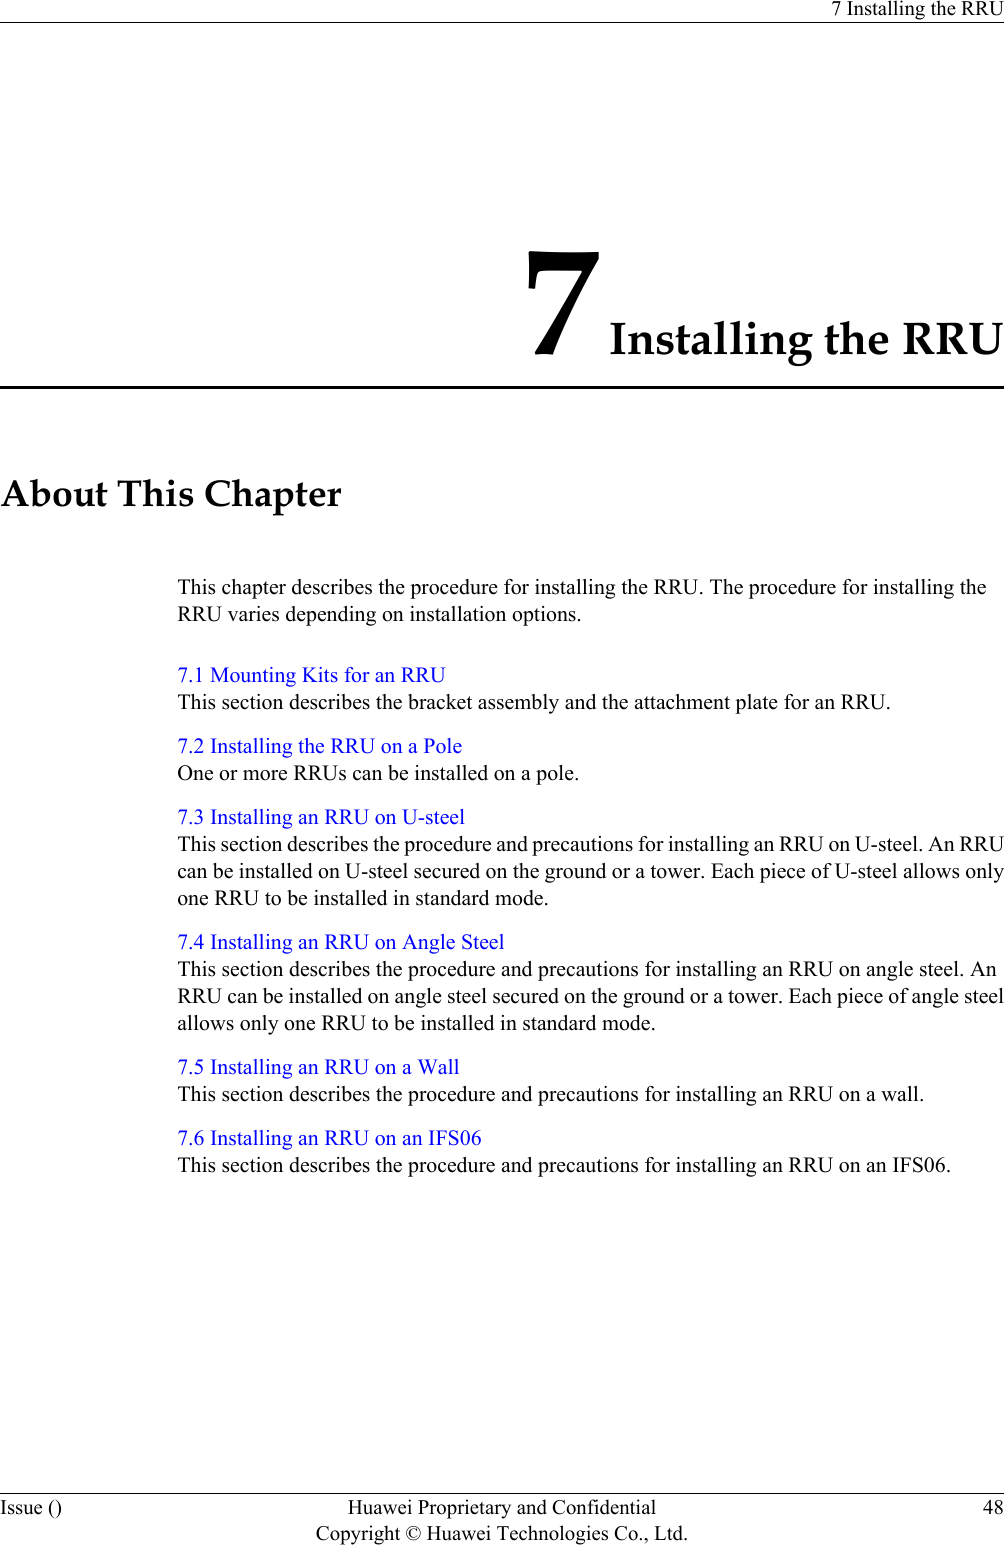 7 Installing the RRUAbout This ChapterThis chapter describes the procedure for installing the RRU. The procedure for installing theRRU varies depending on installation options.7.1 Mounting Kits for an RRUThis section describes the bracket assembly and the attachment plate for an RRU.7.2 Installing the RRU on a PoleOne or more RRUs can be installed on a pole.7.3 Installing an RRU on U-steelThis section describes the procedure and precautions for installing an RRU on U-steel. An RRUcan be installed on U-steel secured on the ground or a tower. Each piece of U-steel allows onlyone RRU to be installed in standard mode.7.4 Installing an RRU on Angle SteelThis section describes the procedure and precautions for installing an RRU on angle steel. AnRRU can be installed on angle steel secured on the ground or a tower. Each piece of angle steelallows only one RRU to be installed in standard mode.7.5 Installing an RRU on a WallThis section describes the procedure and precautions for installing an RRU on a wall.7.6 Installing an RRU on an IFS06This section describes the procedure and precautions for installing an RRU on an IFS06.7 Installing the RRUIssue () Huawei Proprietary and ConfidentialCopyright © Huawei Technologies Co., Ltd.48